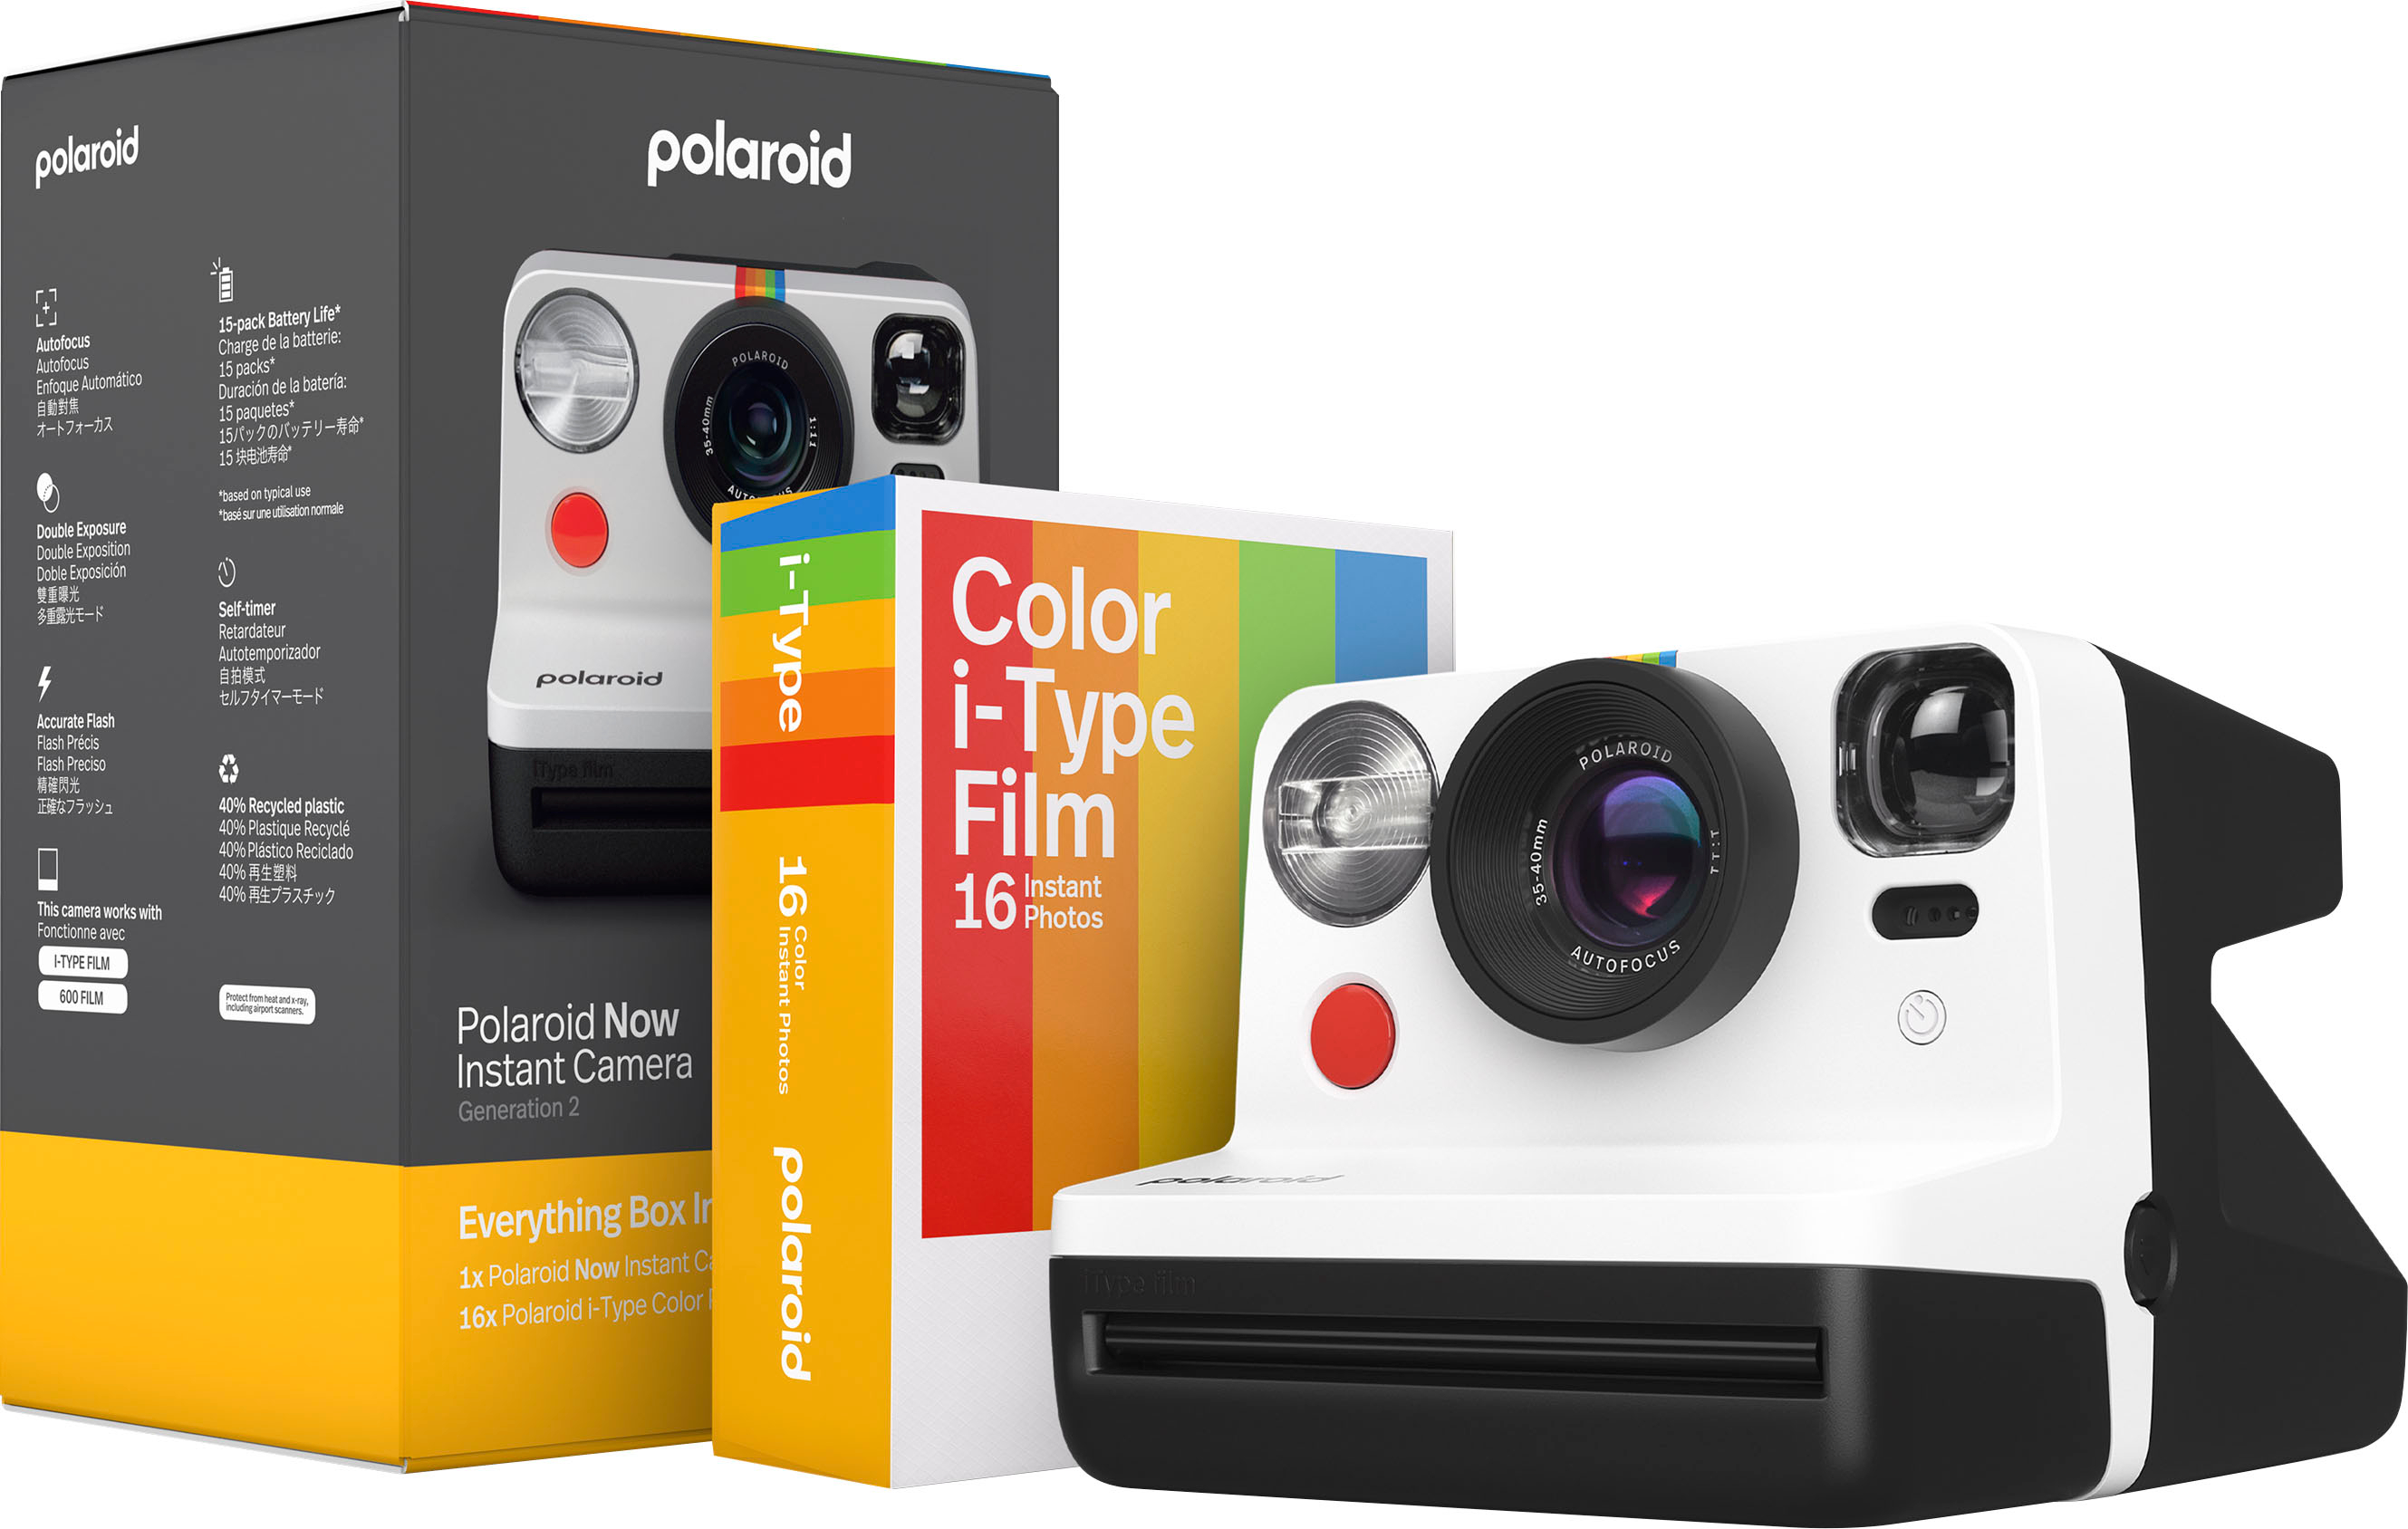 Polaroid 600 Instant Film Camera Bundle with Color 600 Film and Accessory  Kit